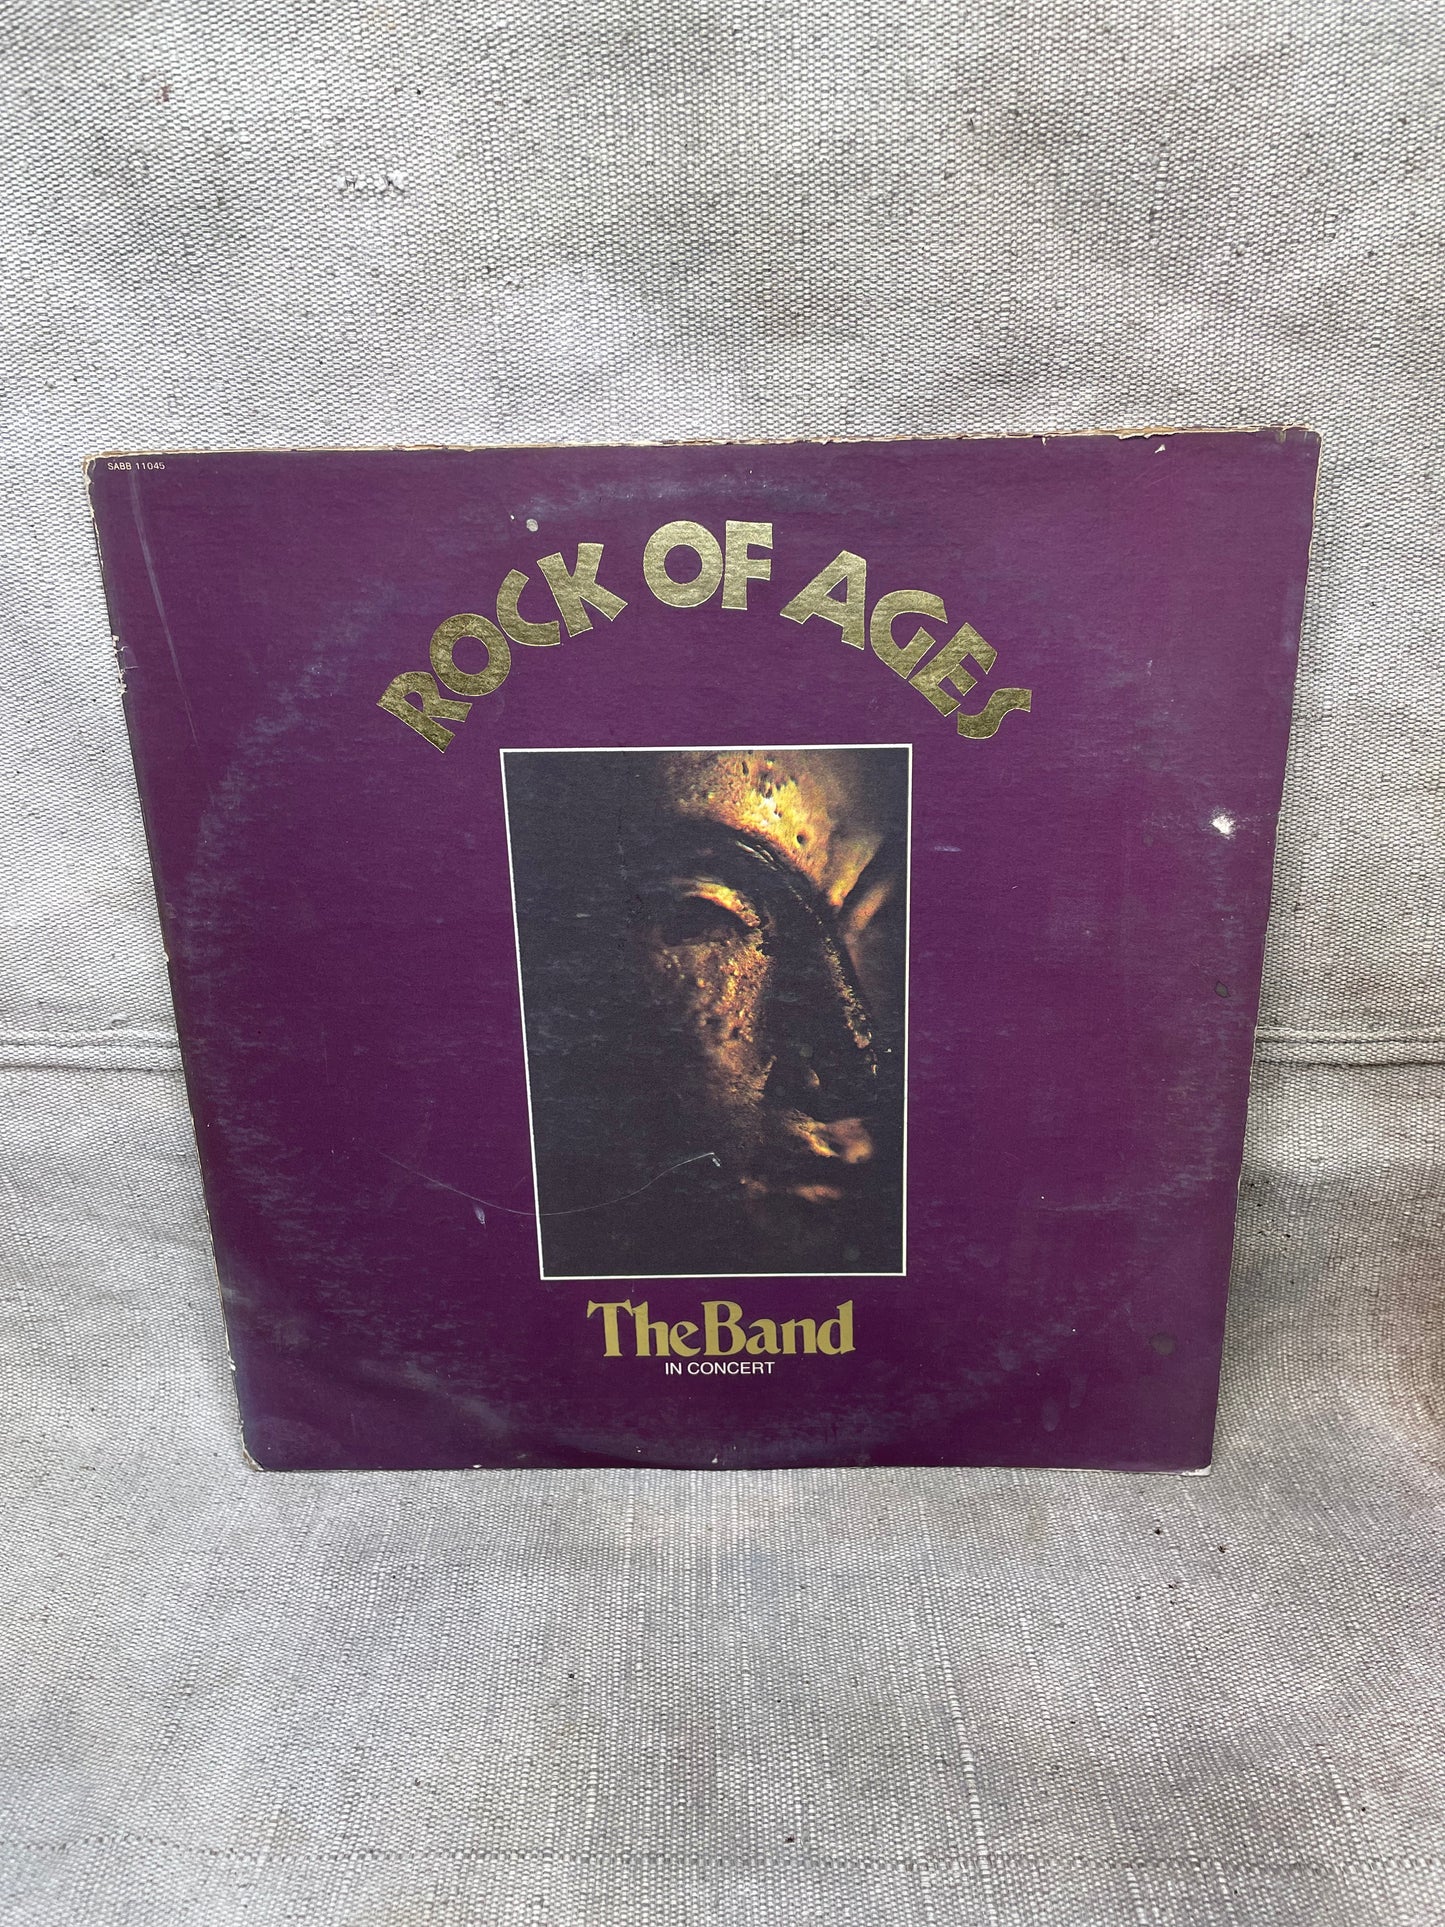 Vintage G- G-The Band Rock of Ages Capitol Record LP